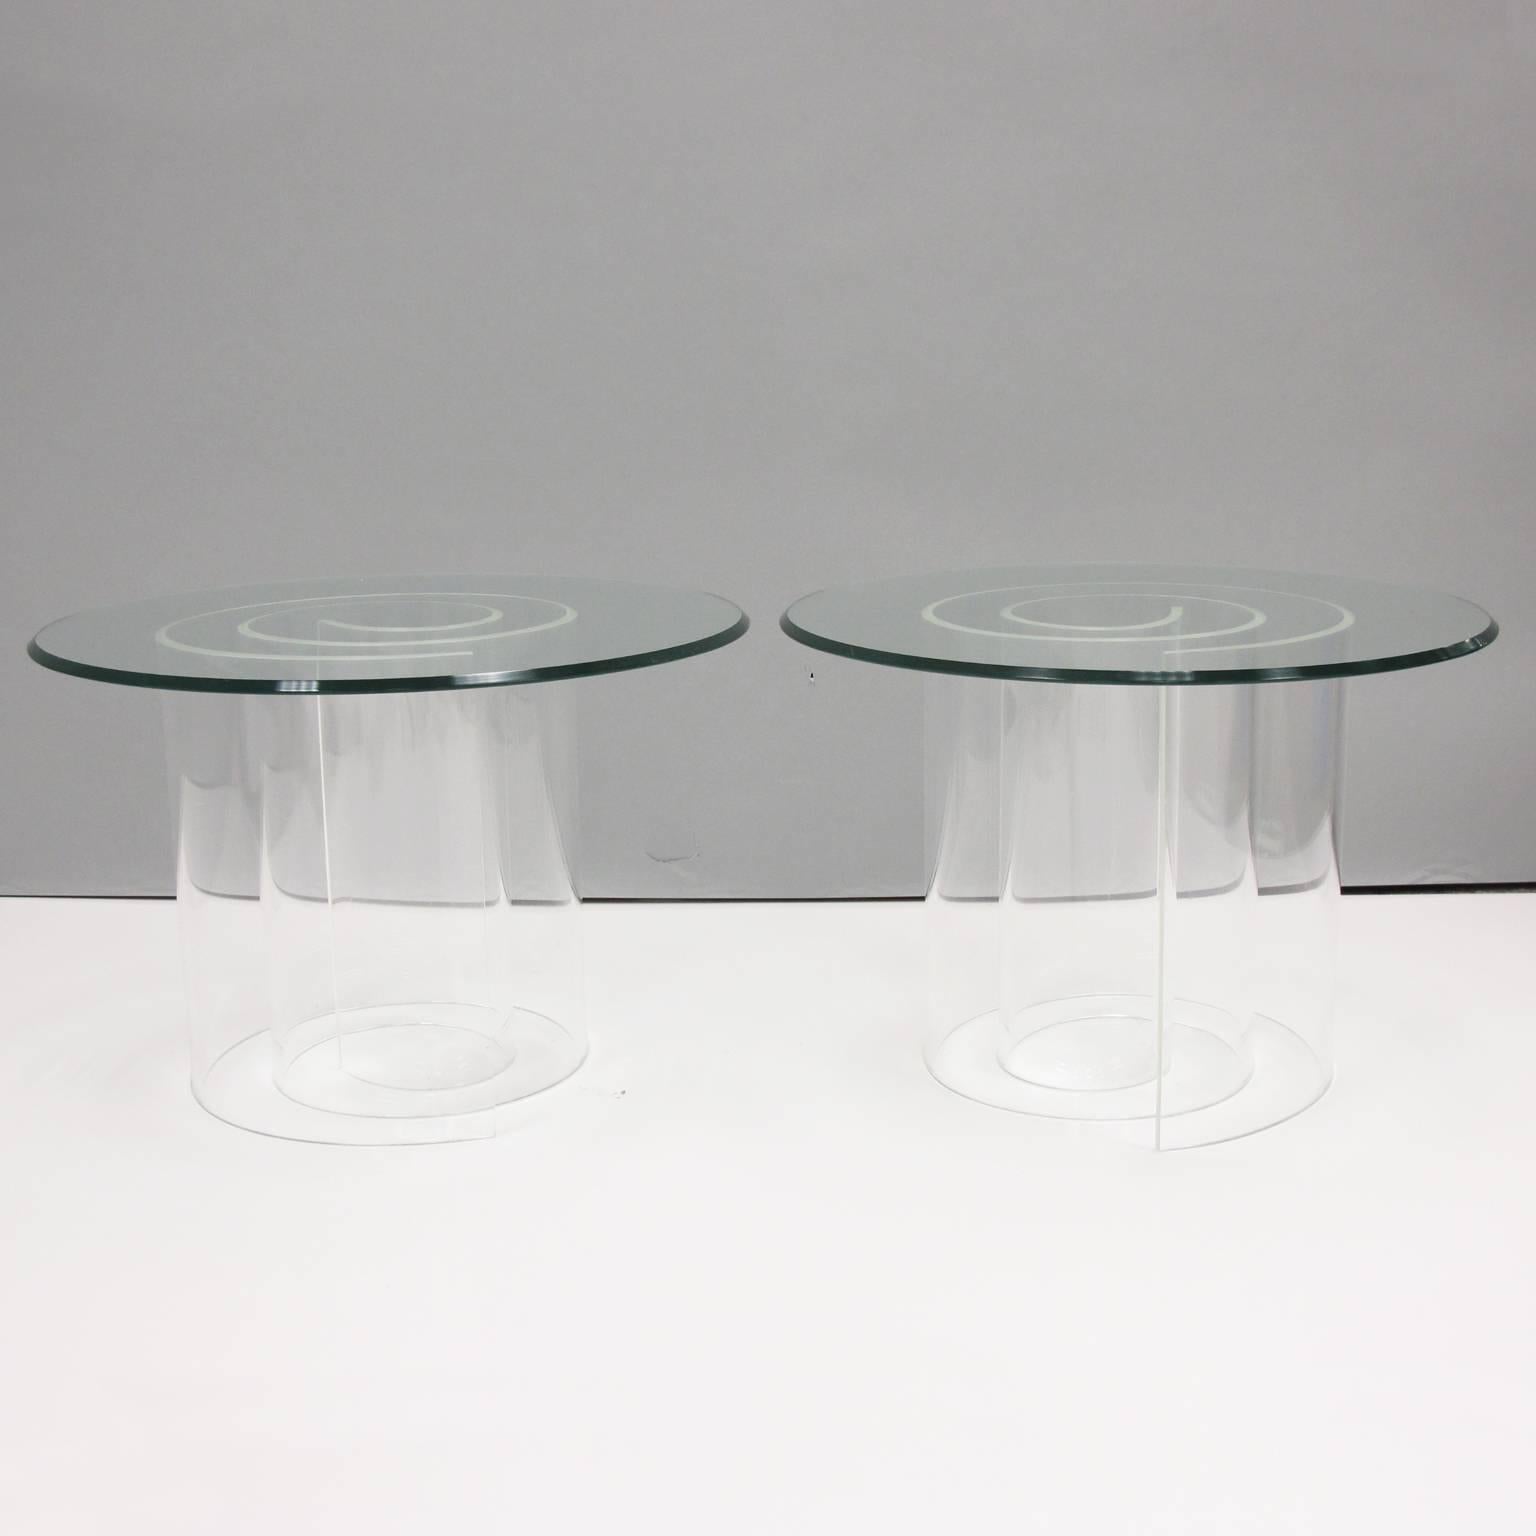 Elegant pair of round coffee or side tables in the style of Vladimir Kagan famous snail table. Snail or spiral thick clear Lucite base with clear glass table top with beveling. Sold as a pair.
Please check our last picture for reference, we do have